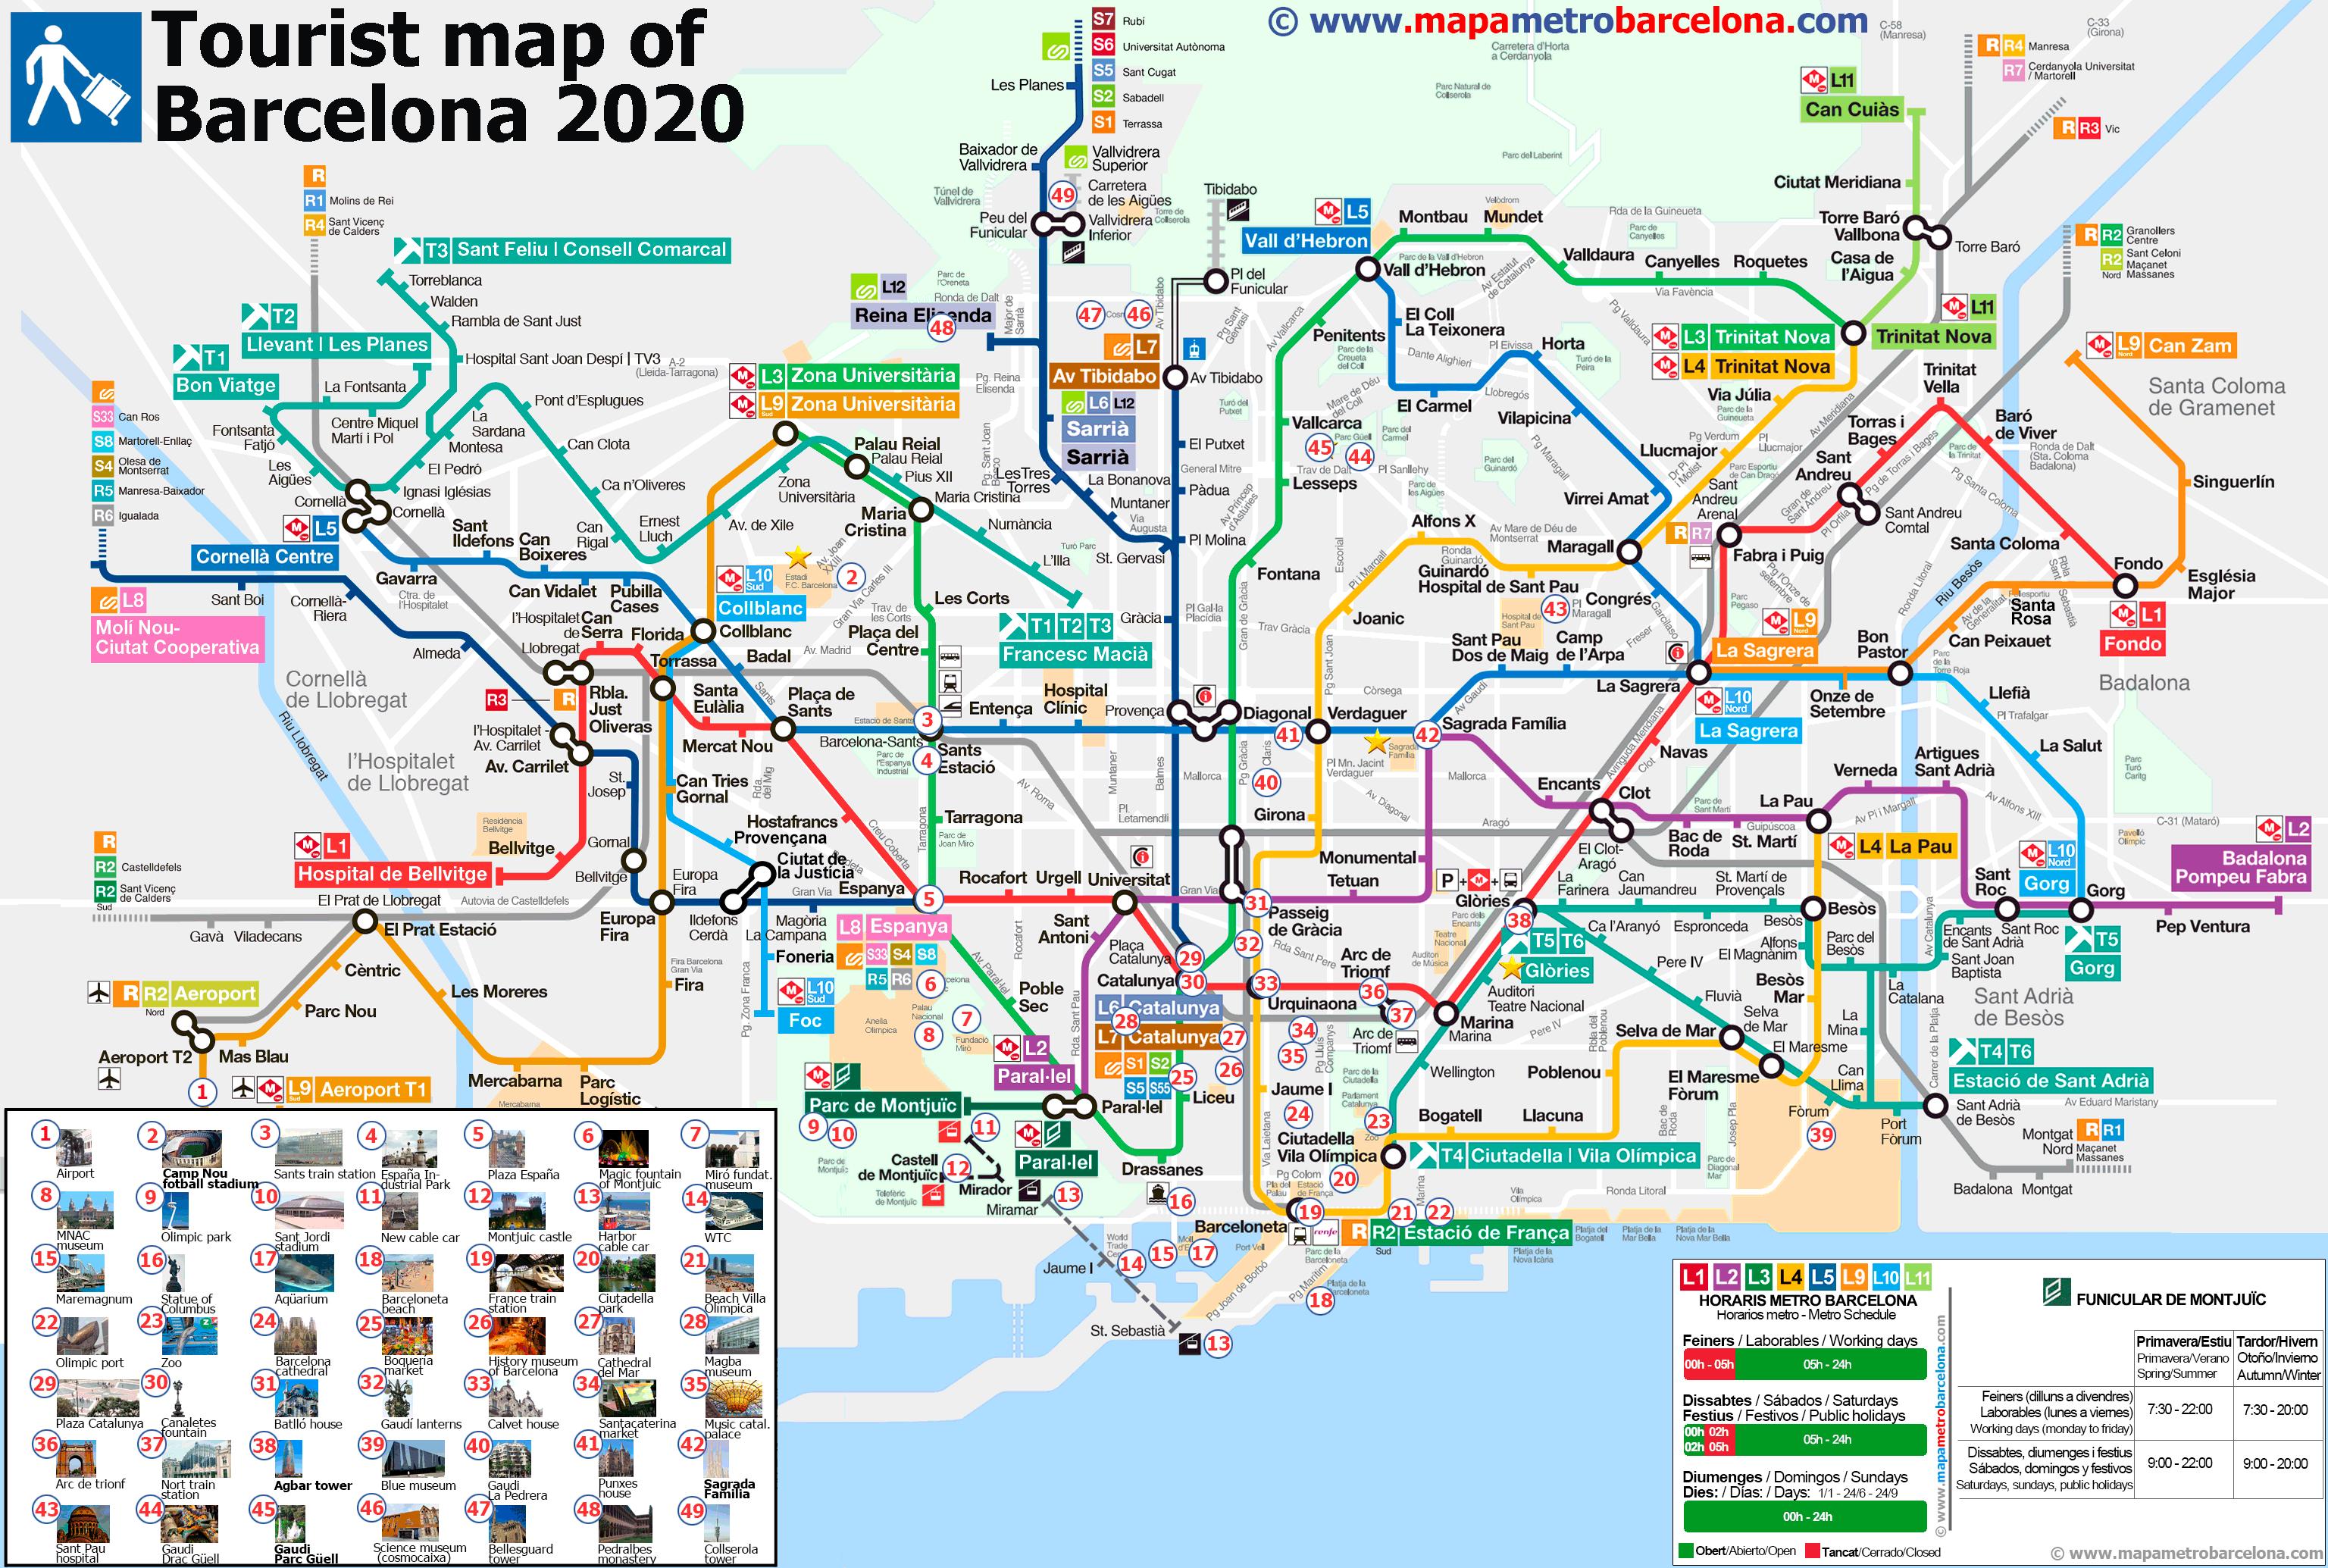 Barcelona metro map with tourist attractions - Barcelona metro map ...